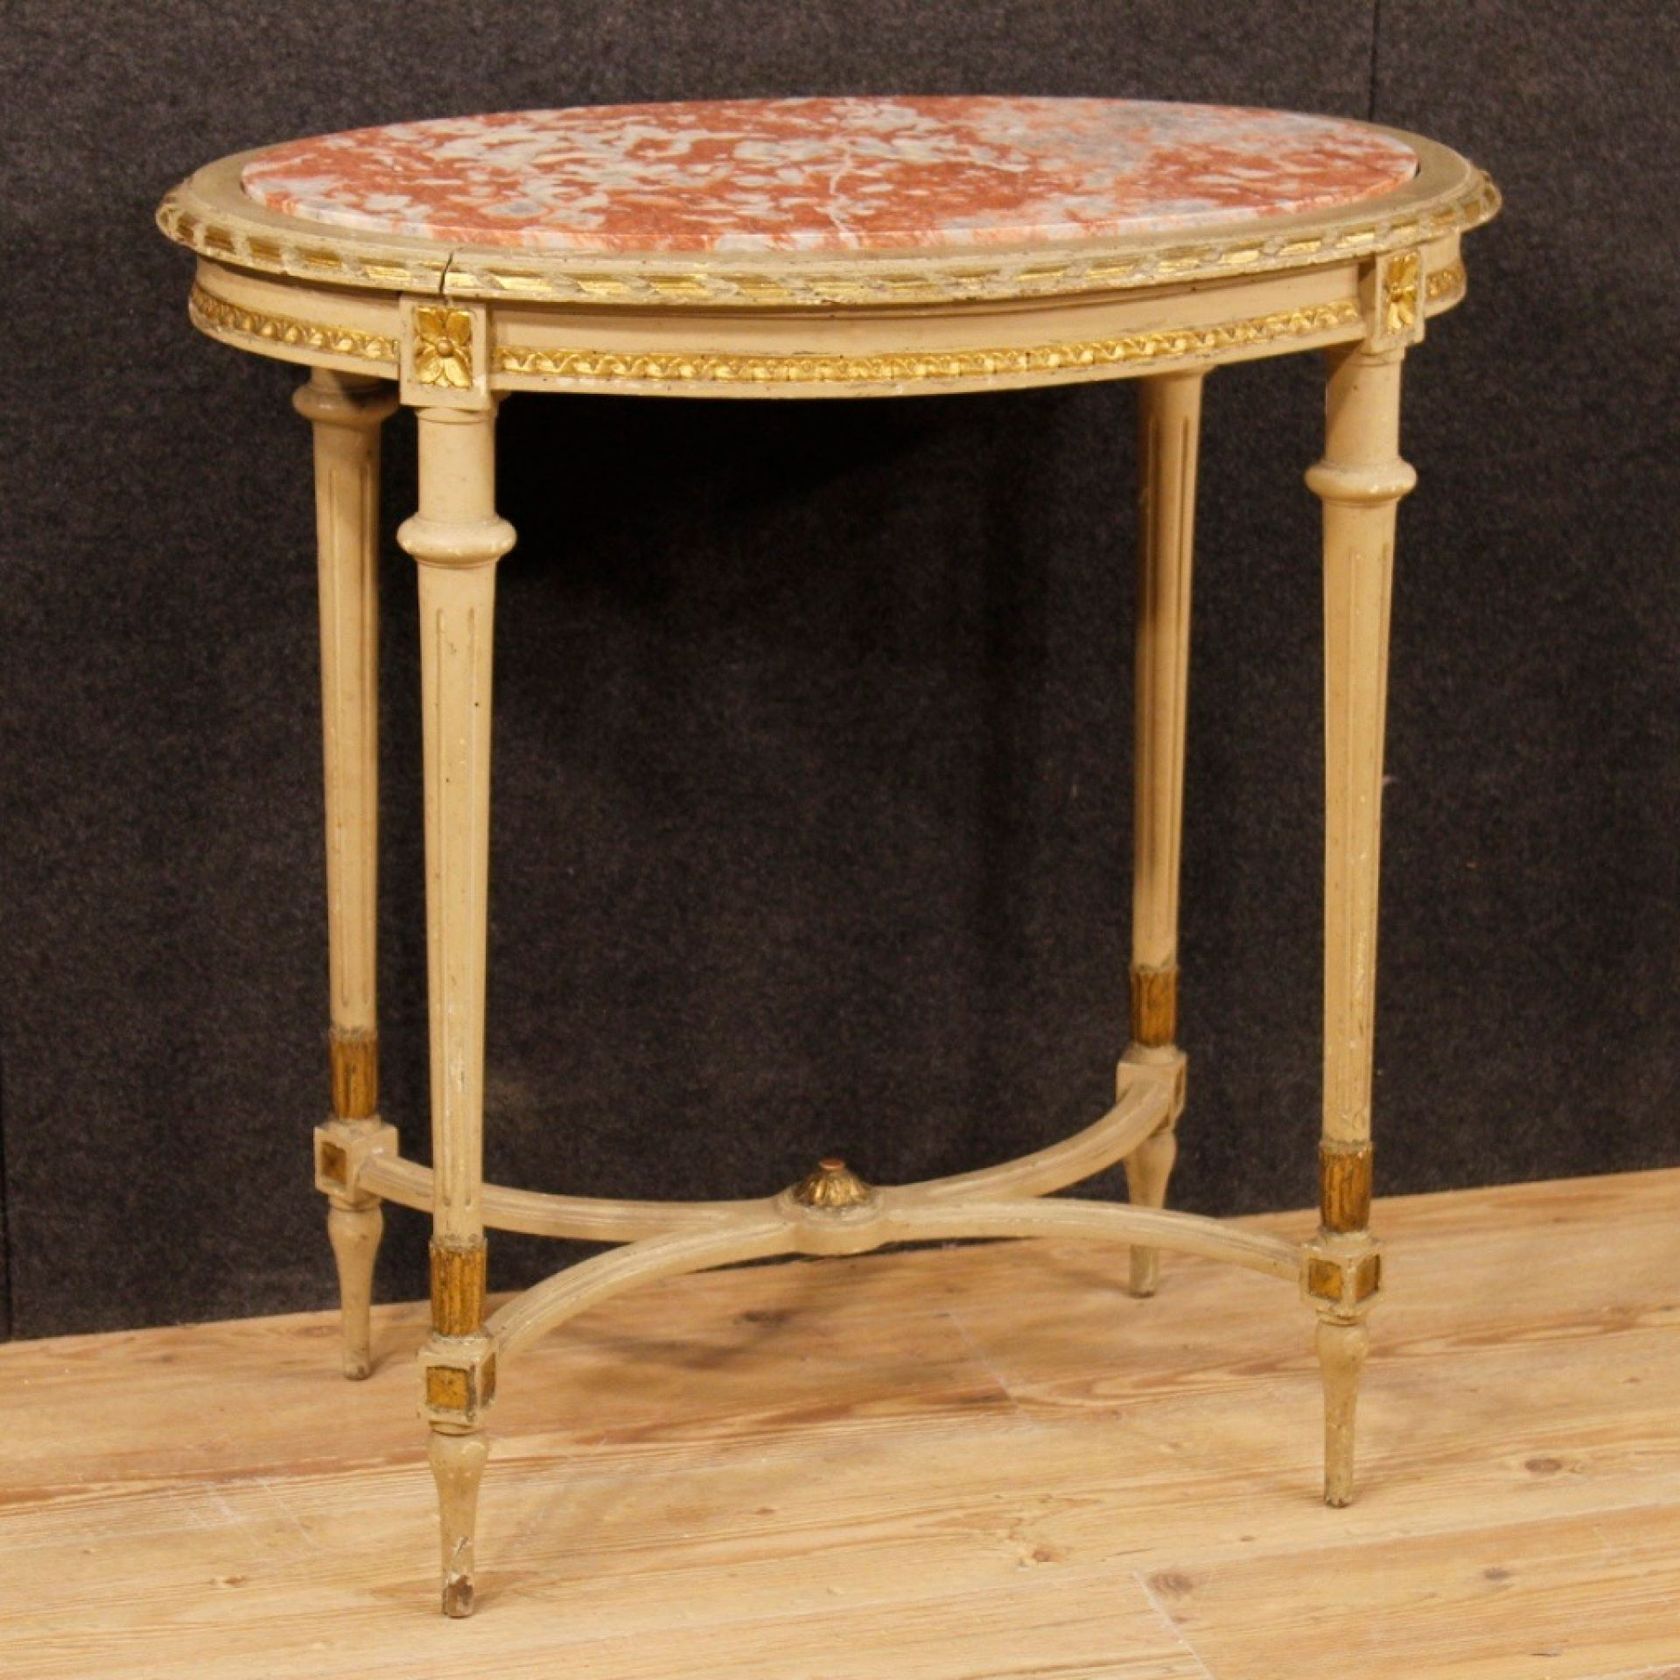 Italian Coffee Table In Lacquered And Gilt Wood With ...